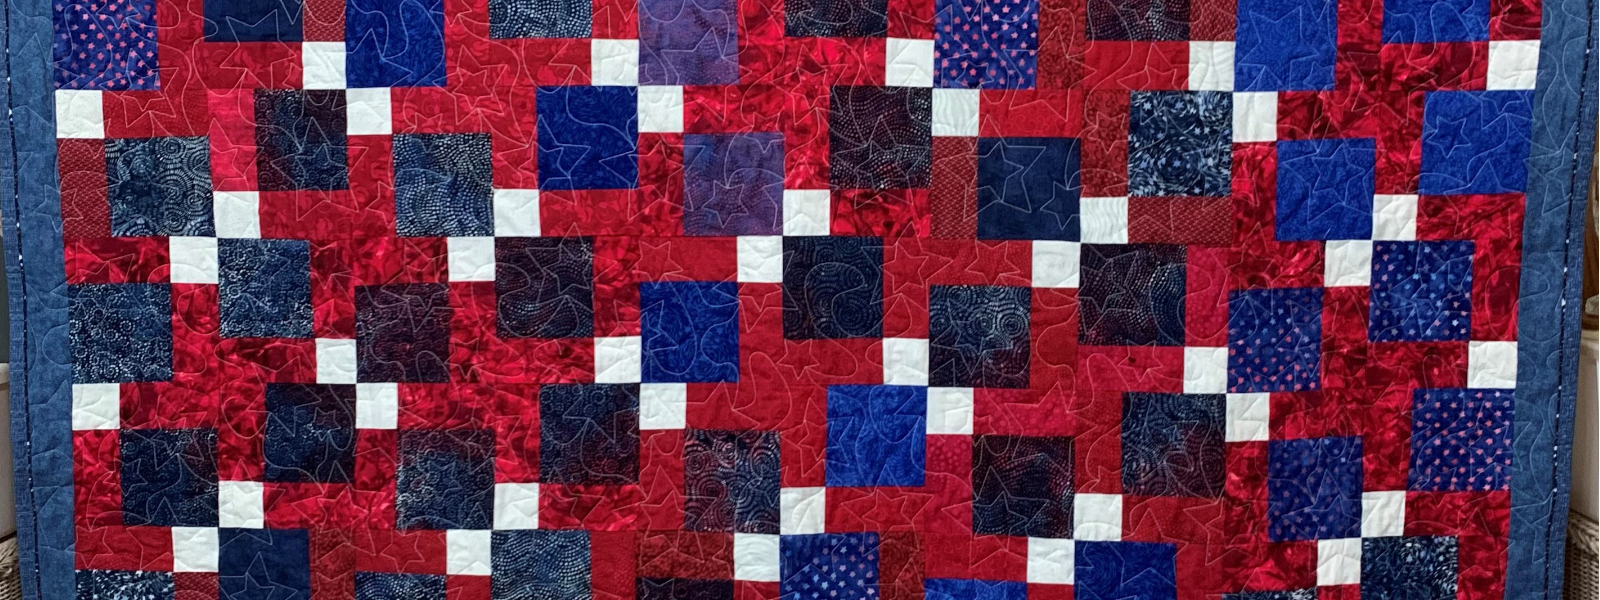 Red and Blue Quilt Donated to Quilts of Valor